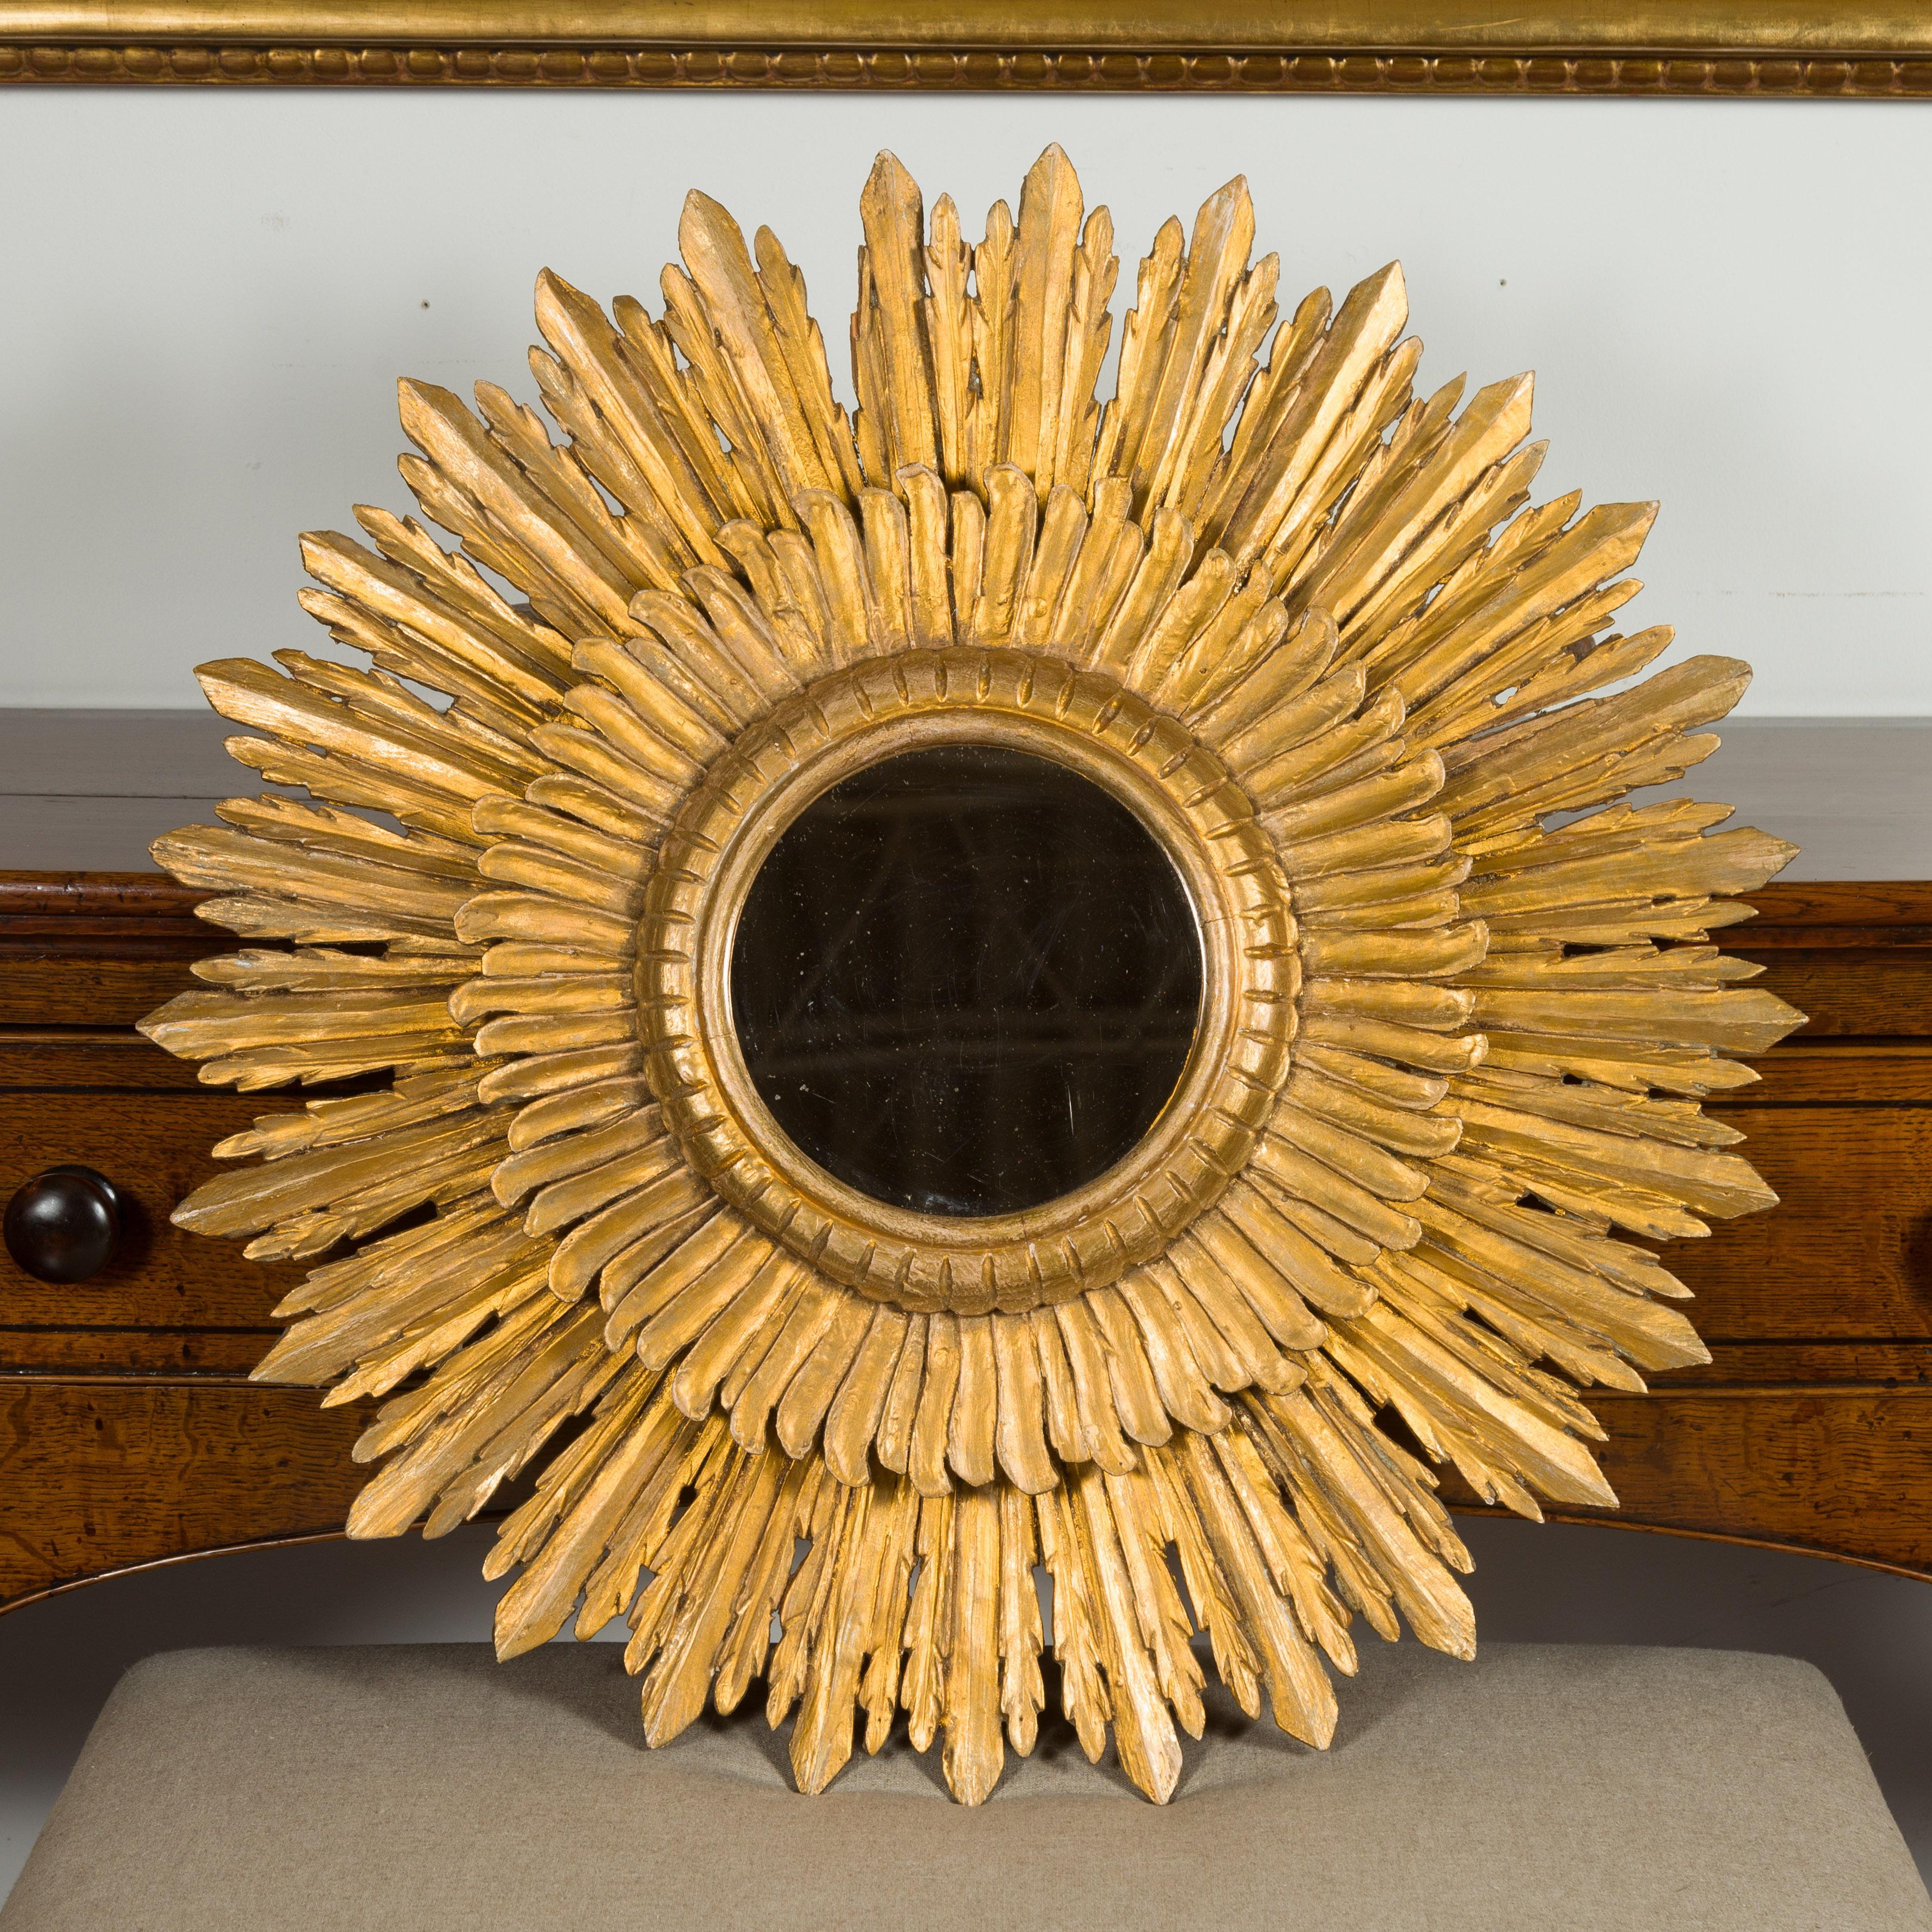 A vintage French giltwood sunburst mirror from the mid-20th century, with layered rays and small mirror plate. Created in France during the midcentury period, this sunburst mirror features a central mirror plate surrounded by a molded frame resting